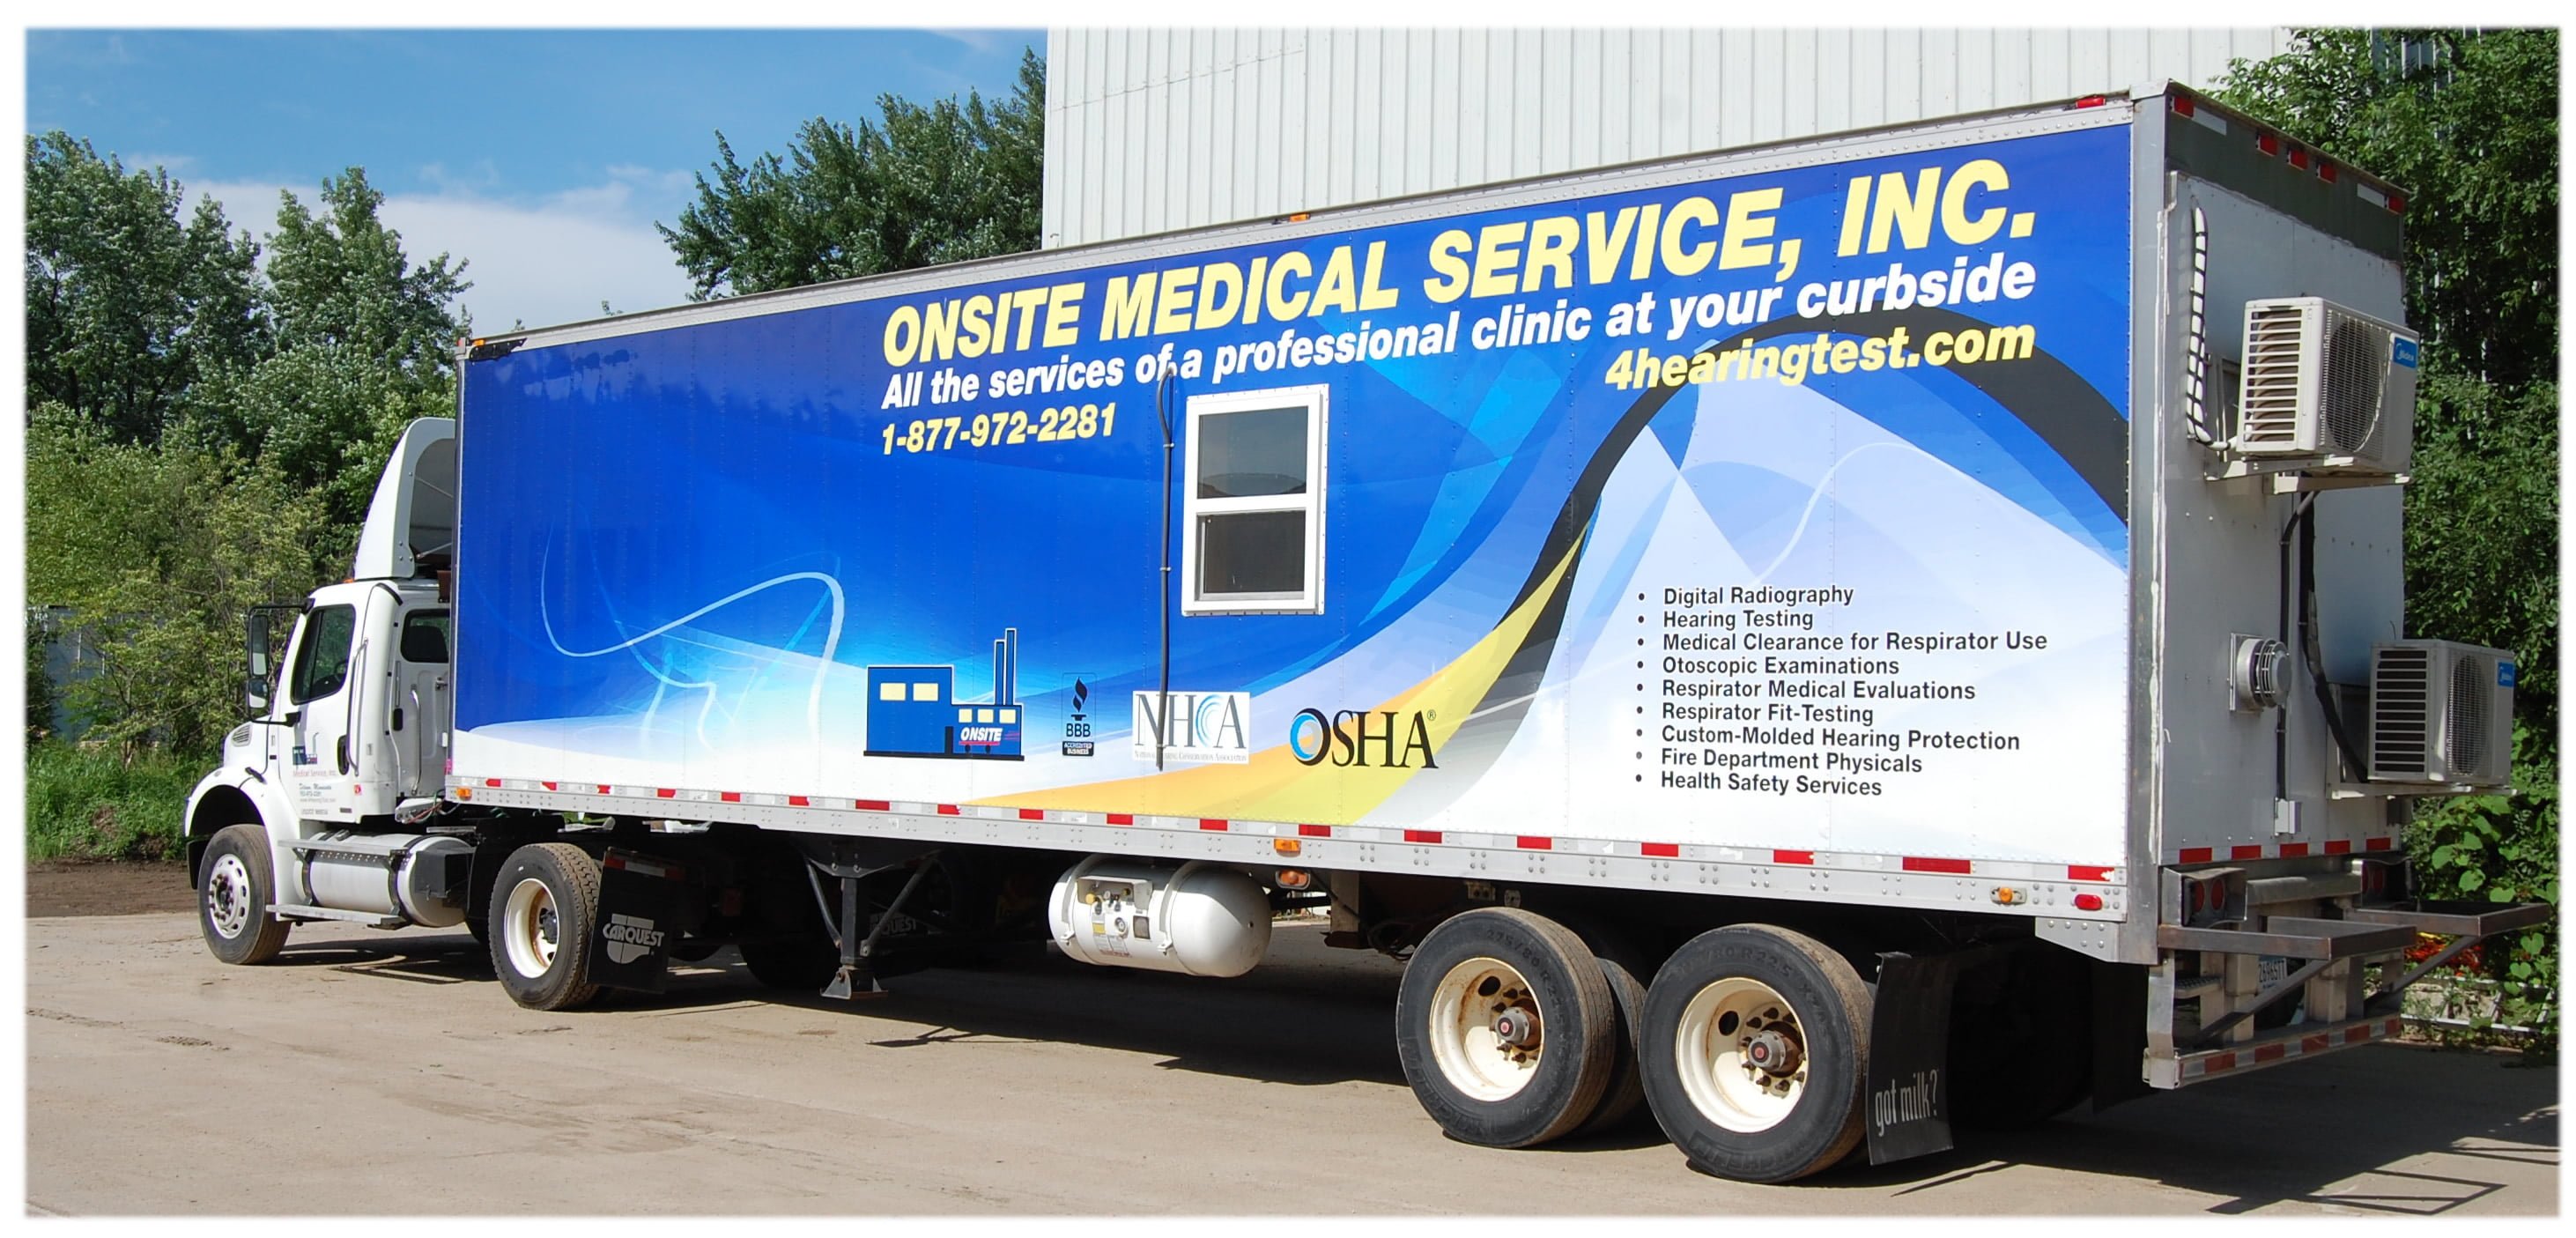 About Onsite Medical Testing by Onsite Medical Service, Inc